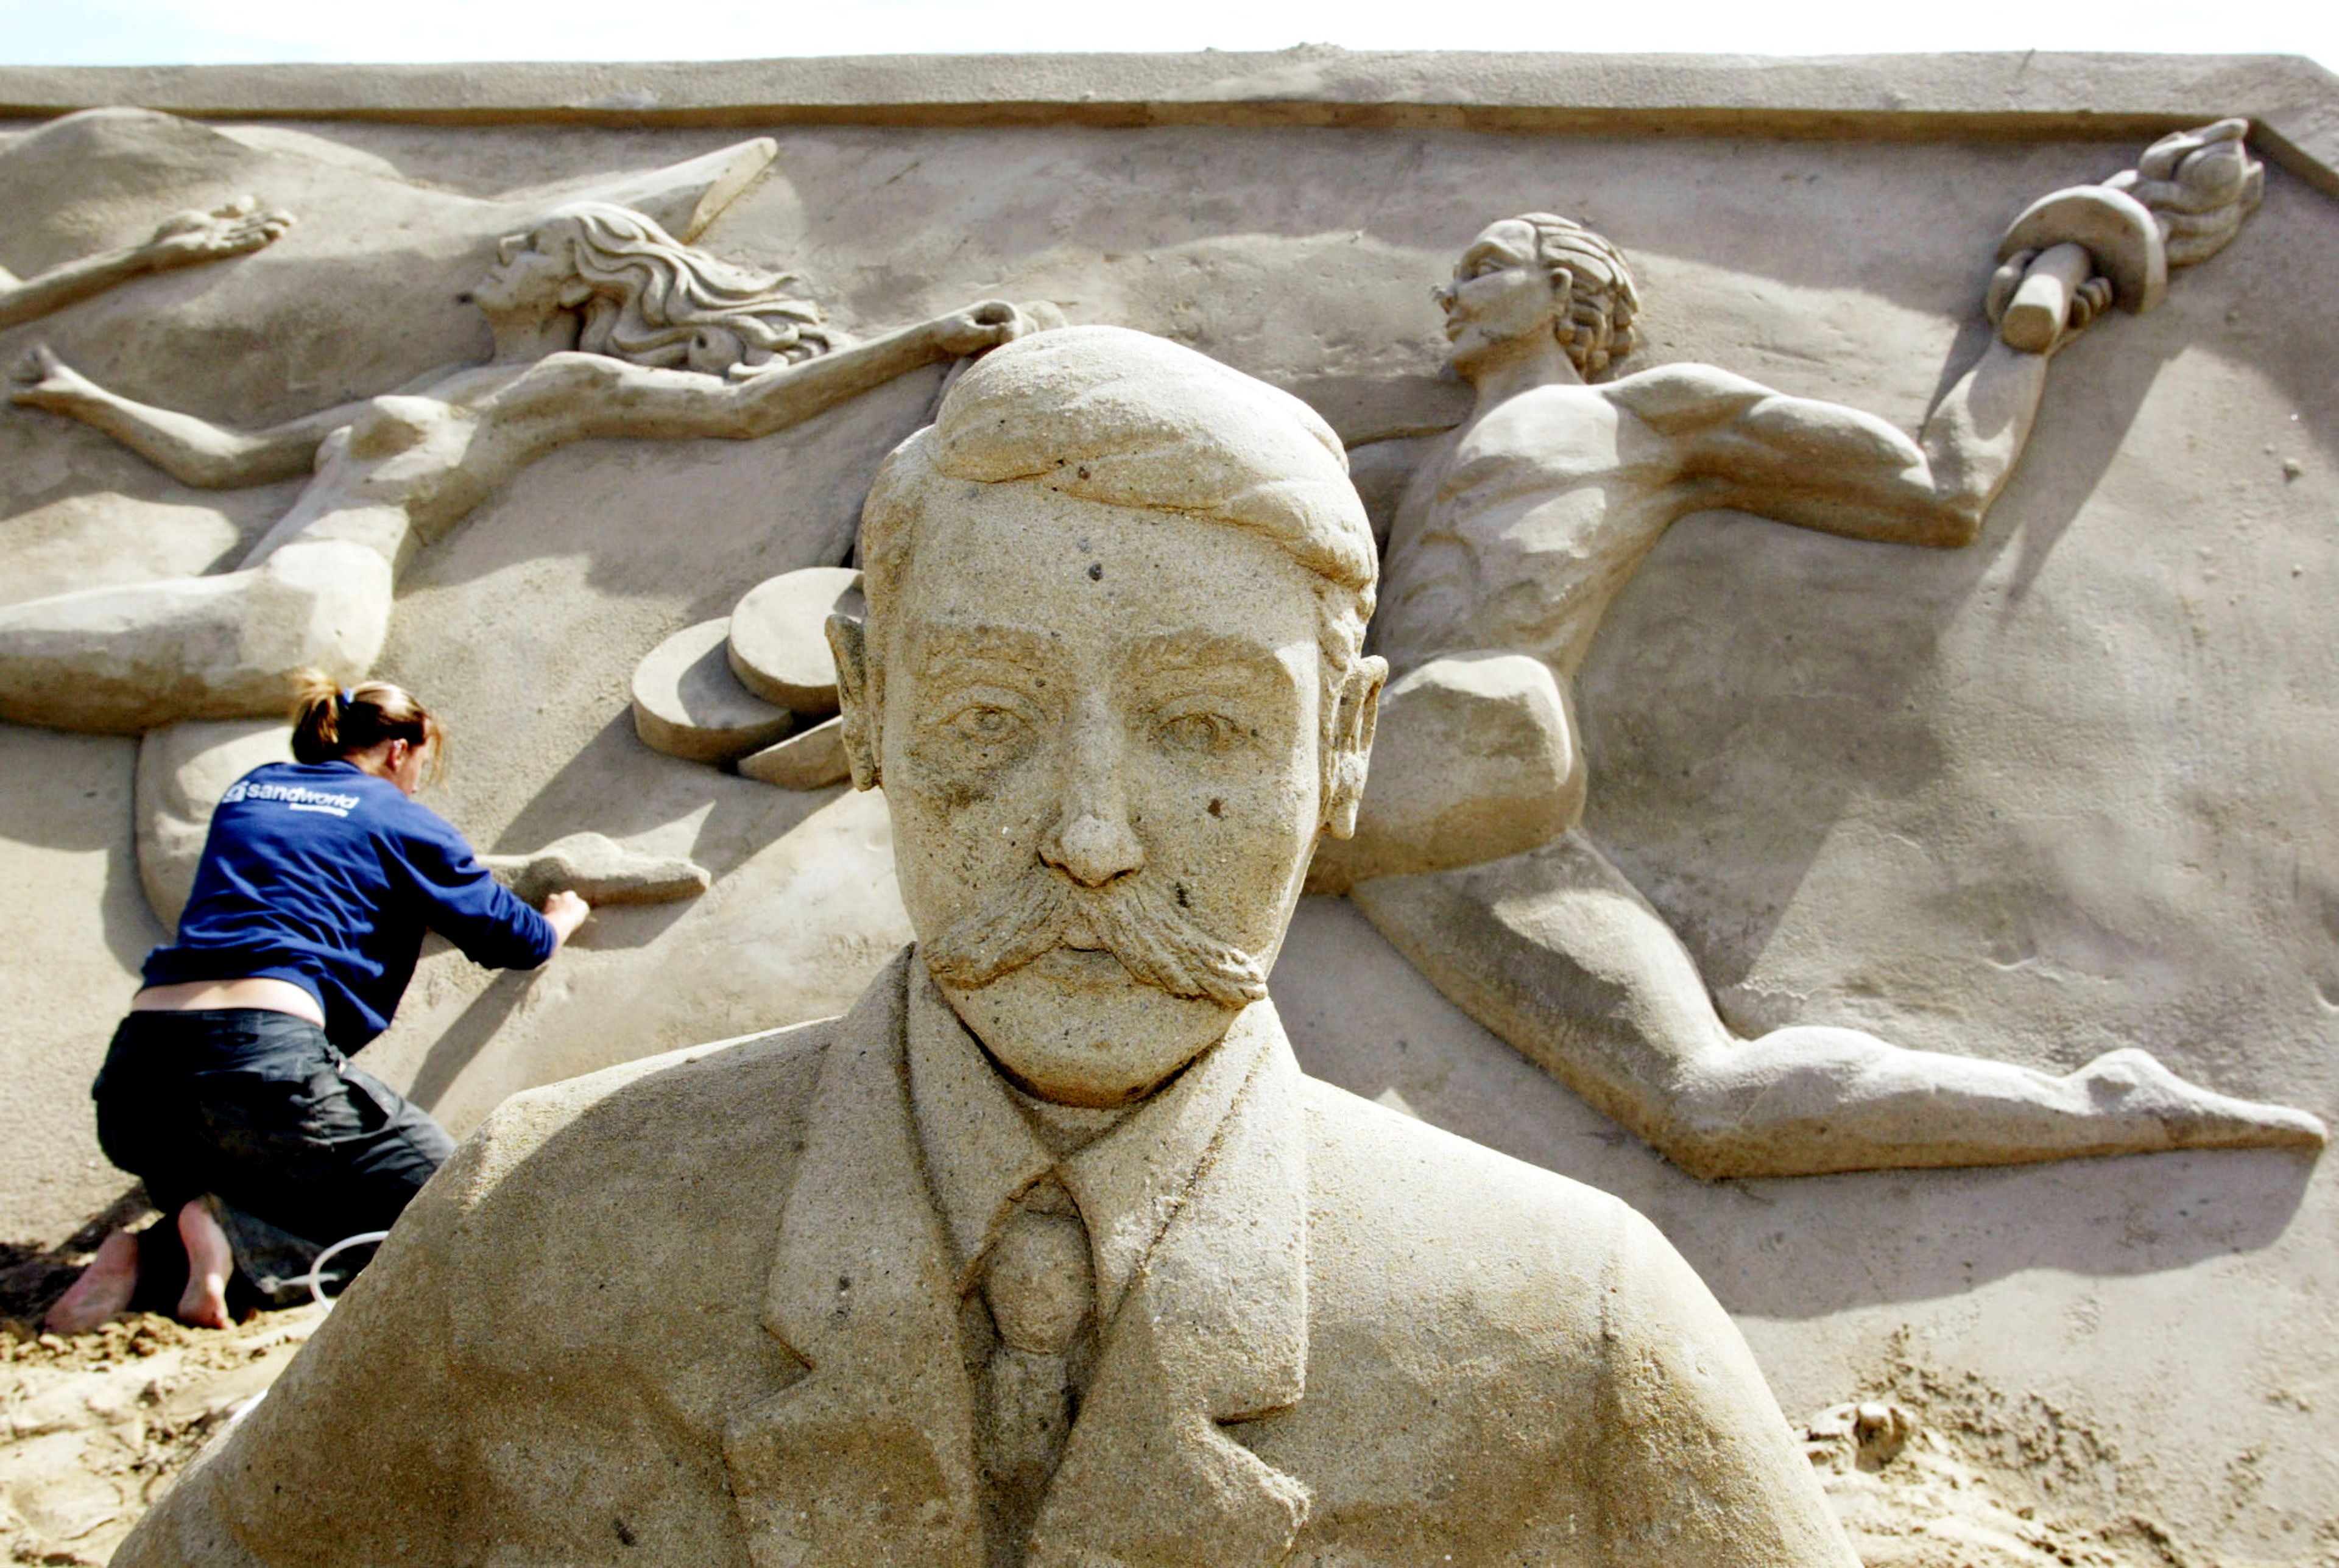 FILE - Carver Maaike Huizinga from the Netherlands gives a final touch to the sand sculpture of sports people behind the sand figure of Pierre de Coubertin, the founder of the modern Olympic Games, in the "Olympic Stadium Travemuende" at the beach of the Luebeck Bay in Luebeck-Travemuende, northern Germany on Tuesday, July 6, 2004. Coubertin envisioned the Olympics as a pacifist exercise that could foster international cooperation and peace, especially in the wake of France's defeat in the Franco-Prussian War. (AP Photo/Heribert Proepper, File)